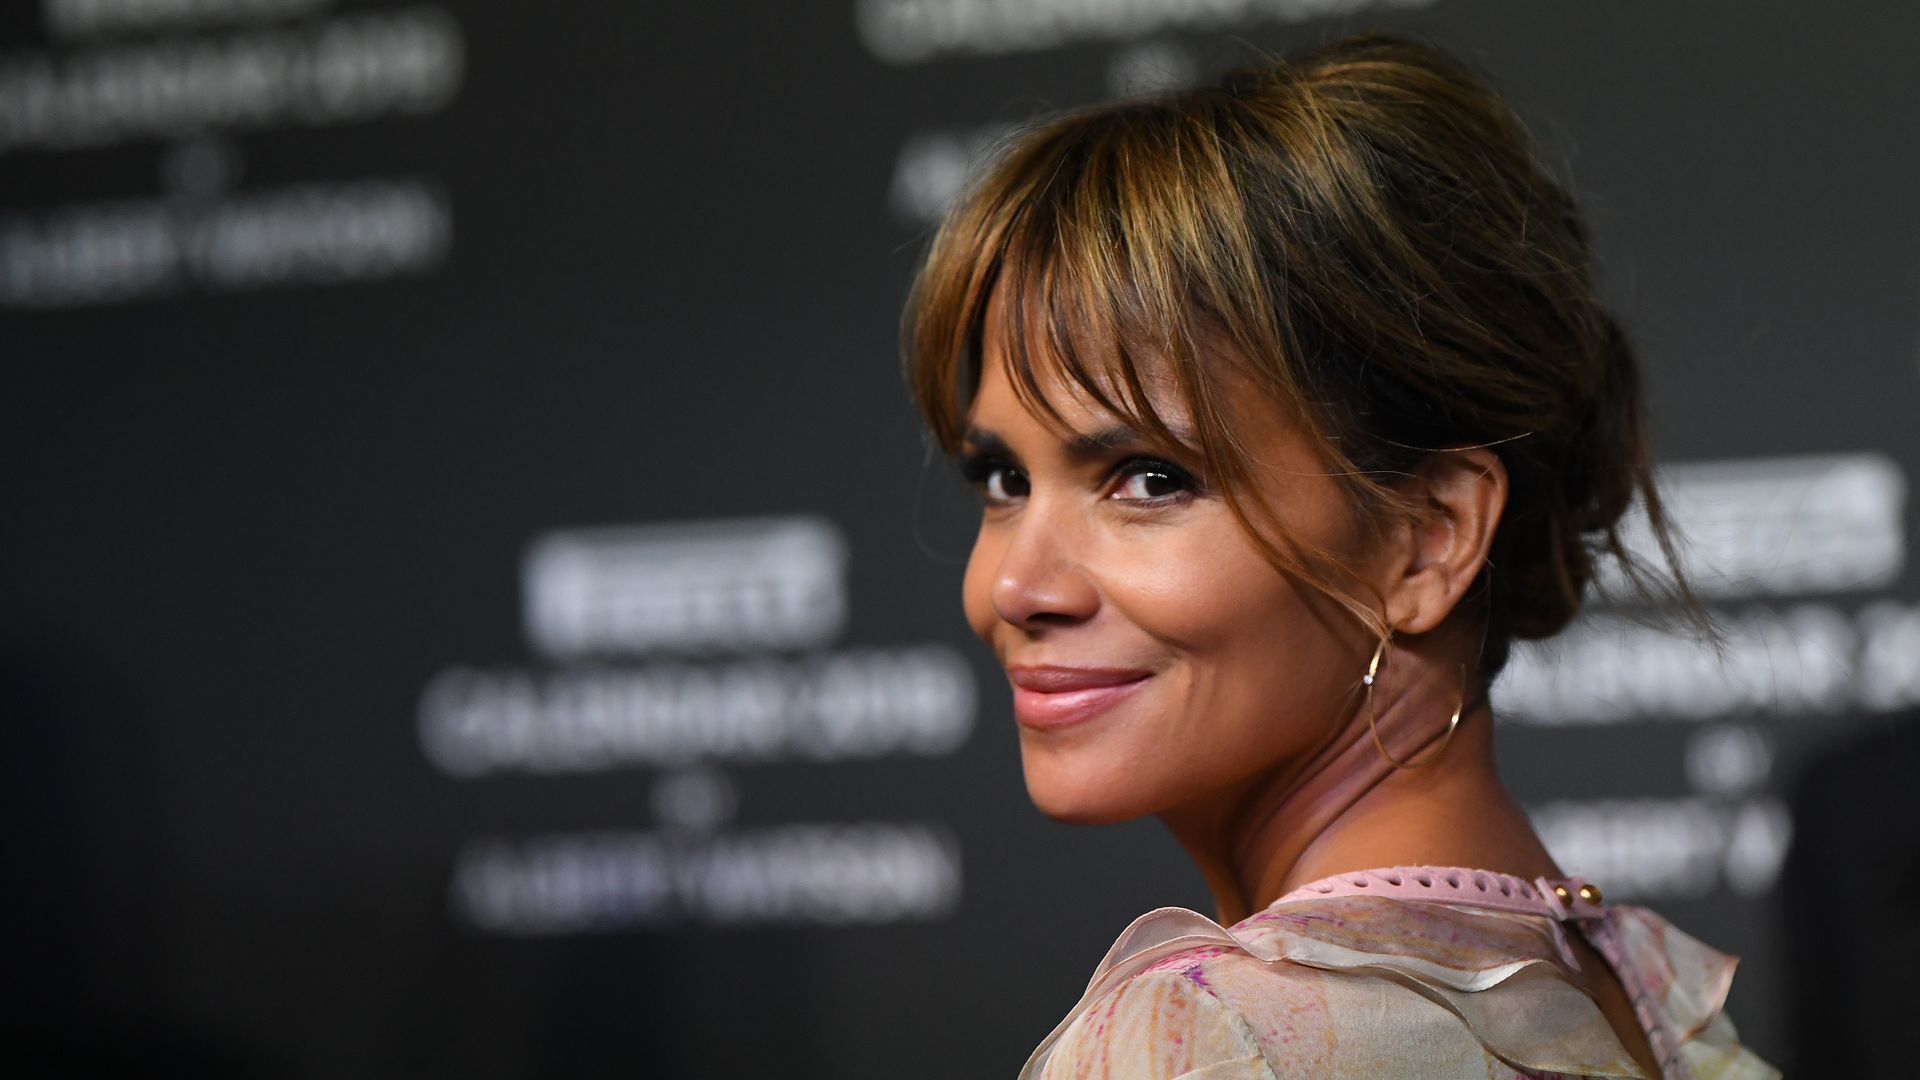 Halle Berry walks the red carpet ahead of the 2019 Pirelli Calendar launch gala at HangarBicocca on December 5, 2018 in Milan, Italy